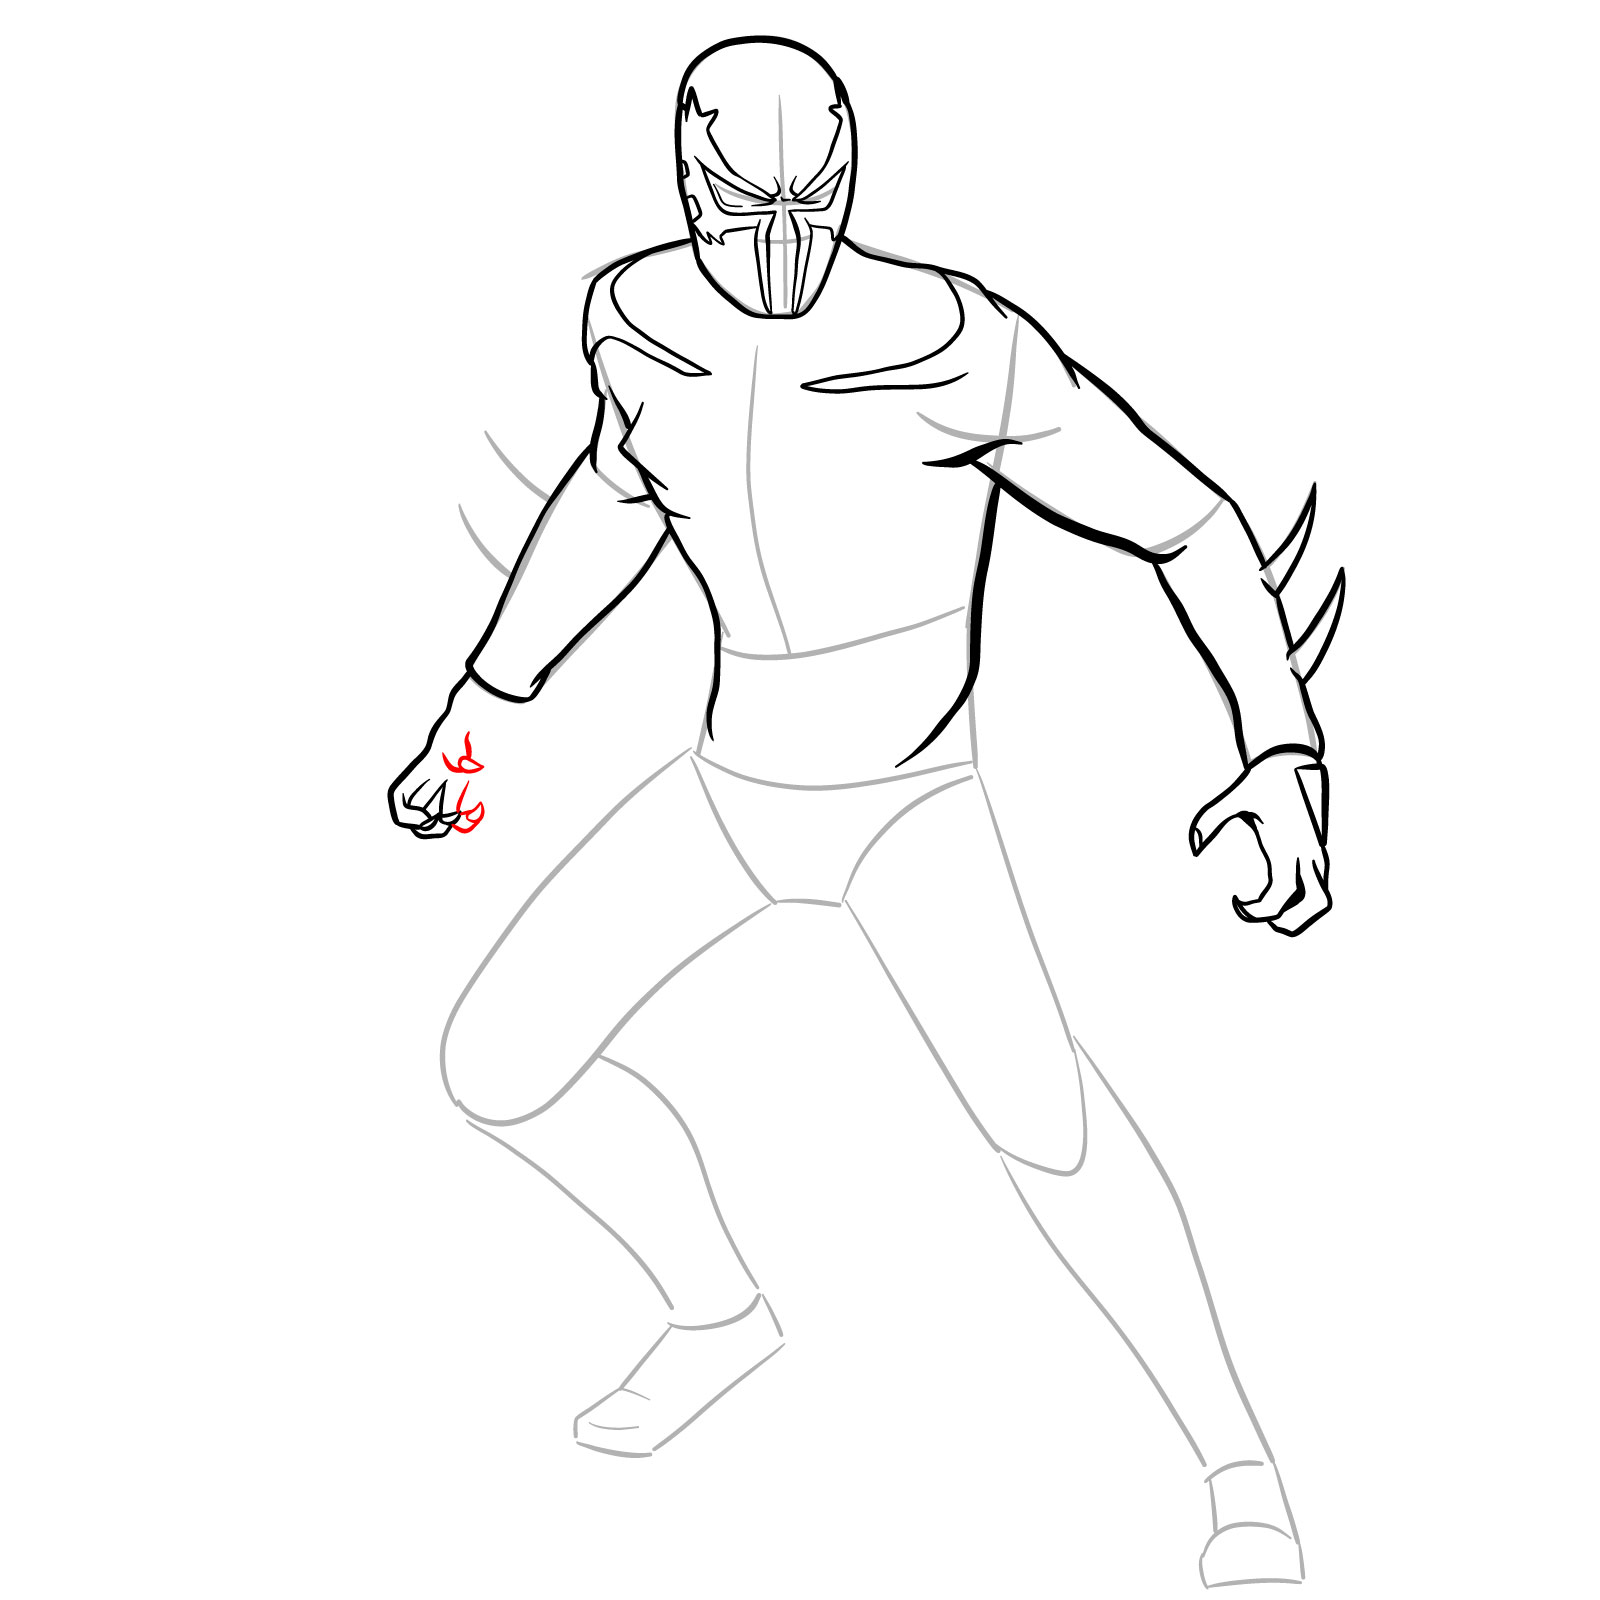 How to draw Spider-Man 2099 - step 22